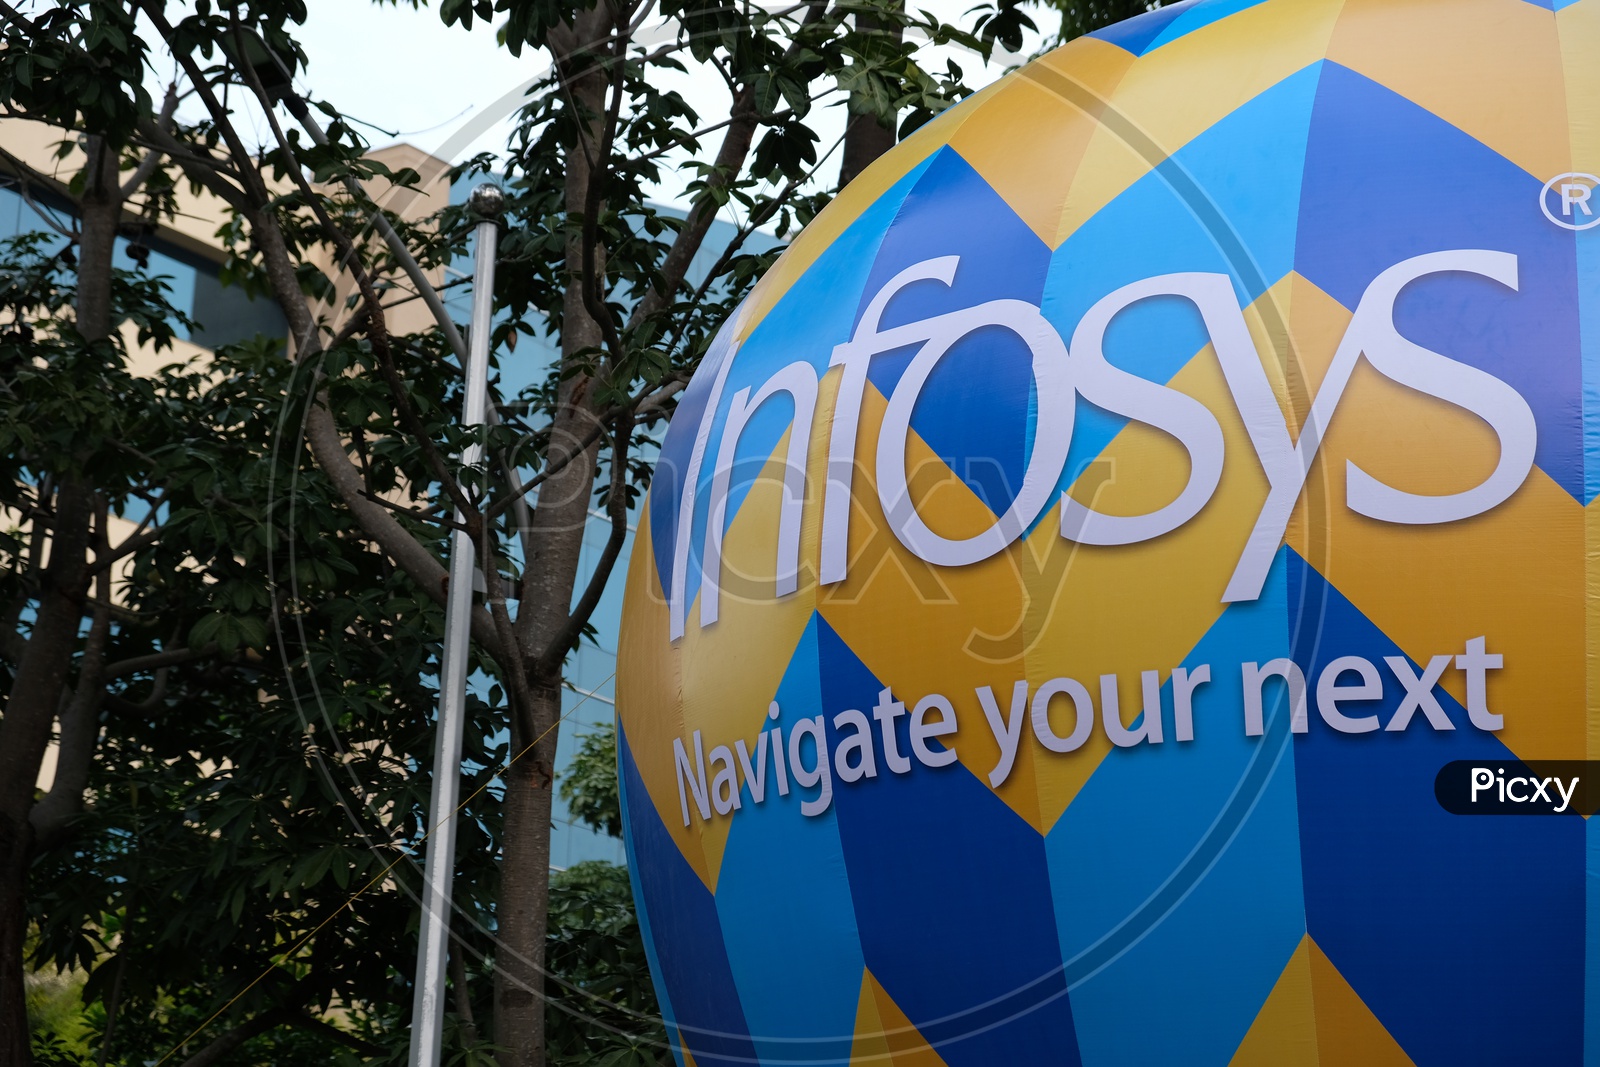 Infosys Q3 Results 2021: Infosys Q3 net profit up 16.6% to Rs 5,197 crore,  ups FY21 revenue growth outlook to 4.5-5% - Industry News | The Financial  Express